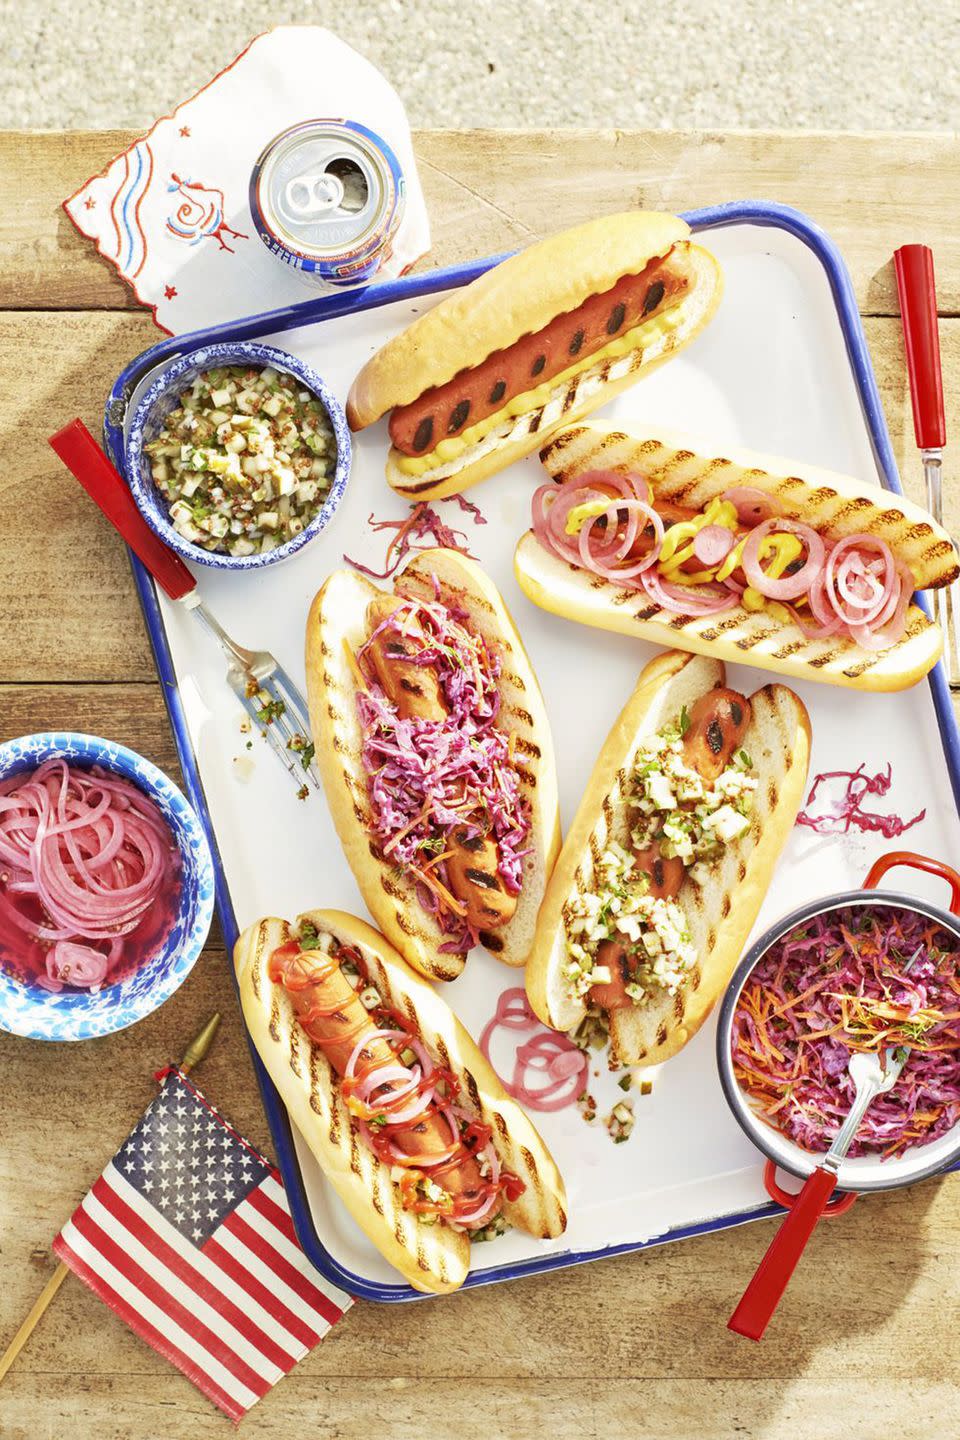 Grilled Hotdogs with Fixin's